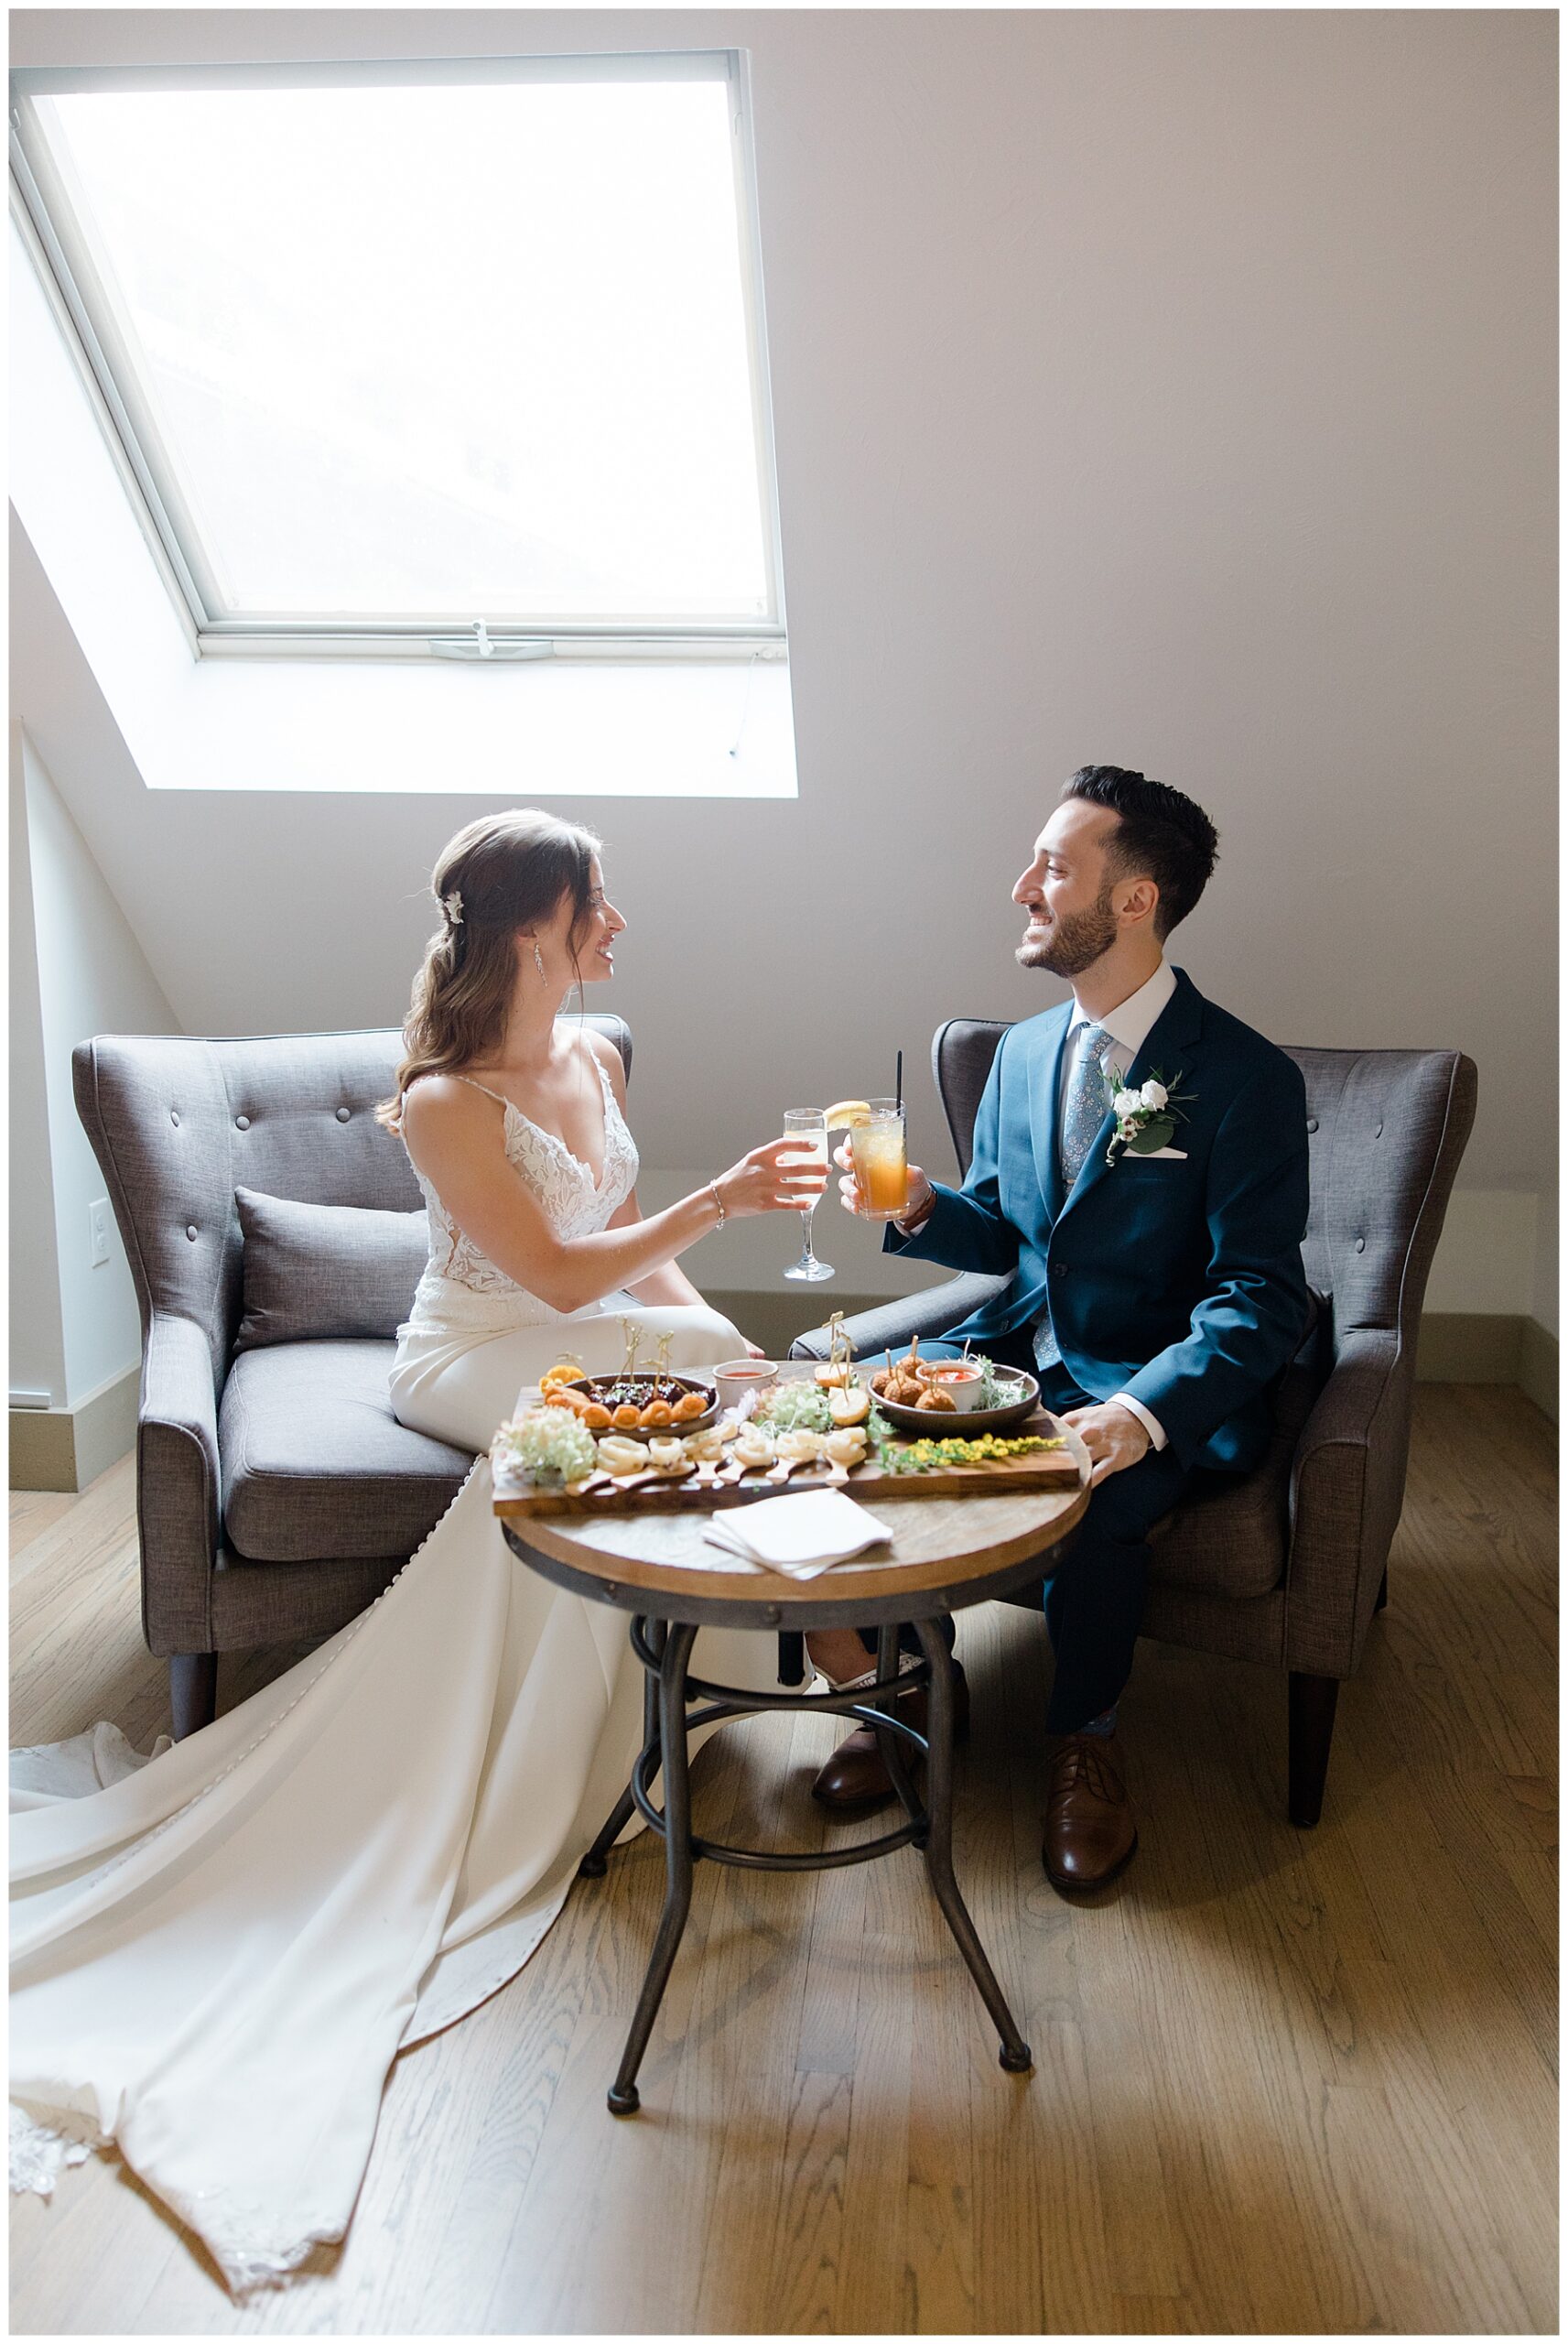 newlyweds steal private moment away and share dinner 